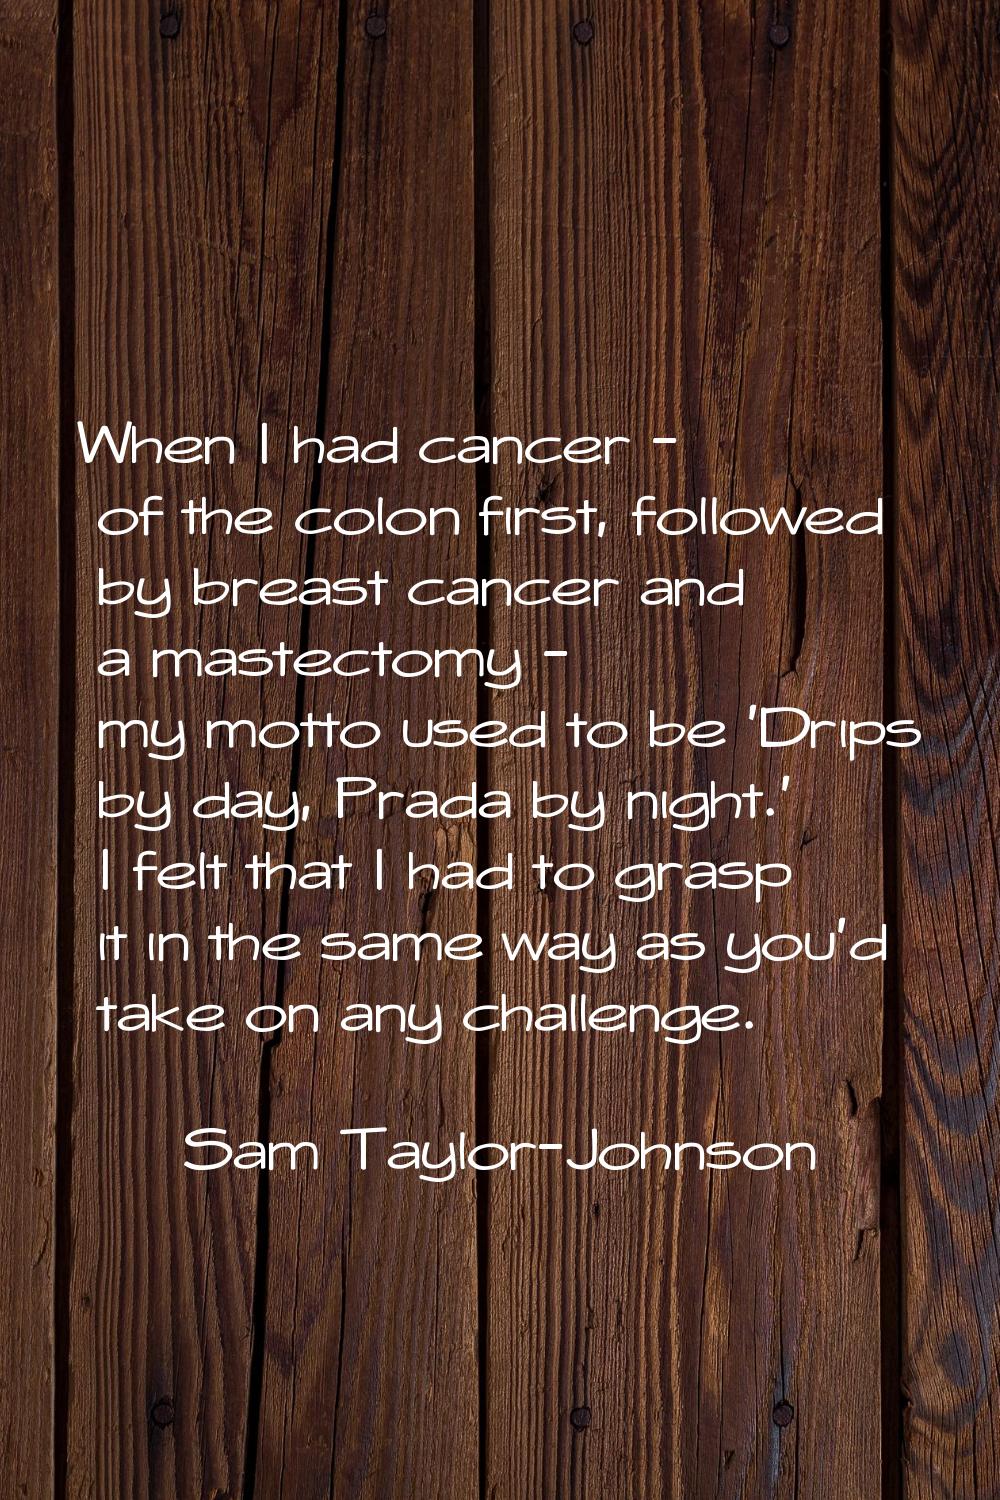 When I had cancer - of the colon first, followed by breast cancer and a mastectomy - my motto used 